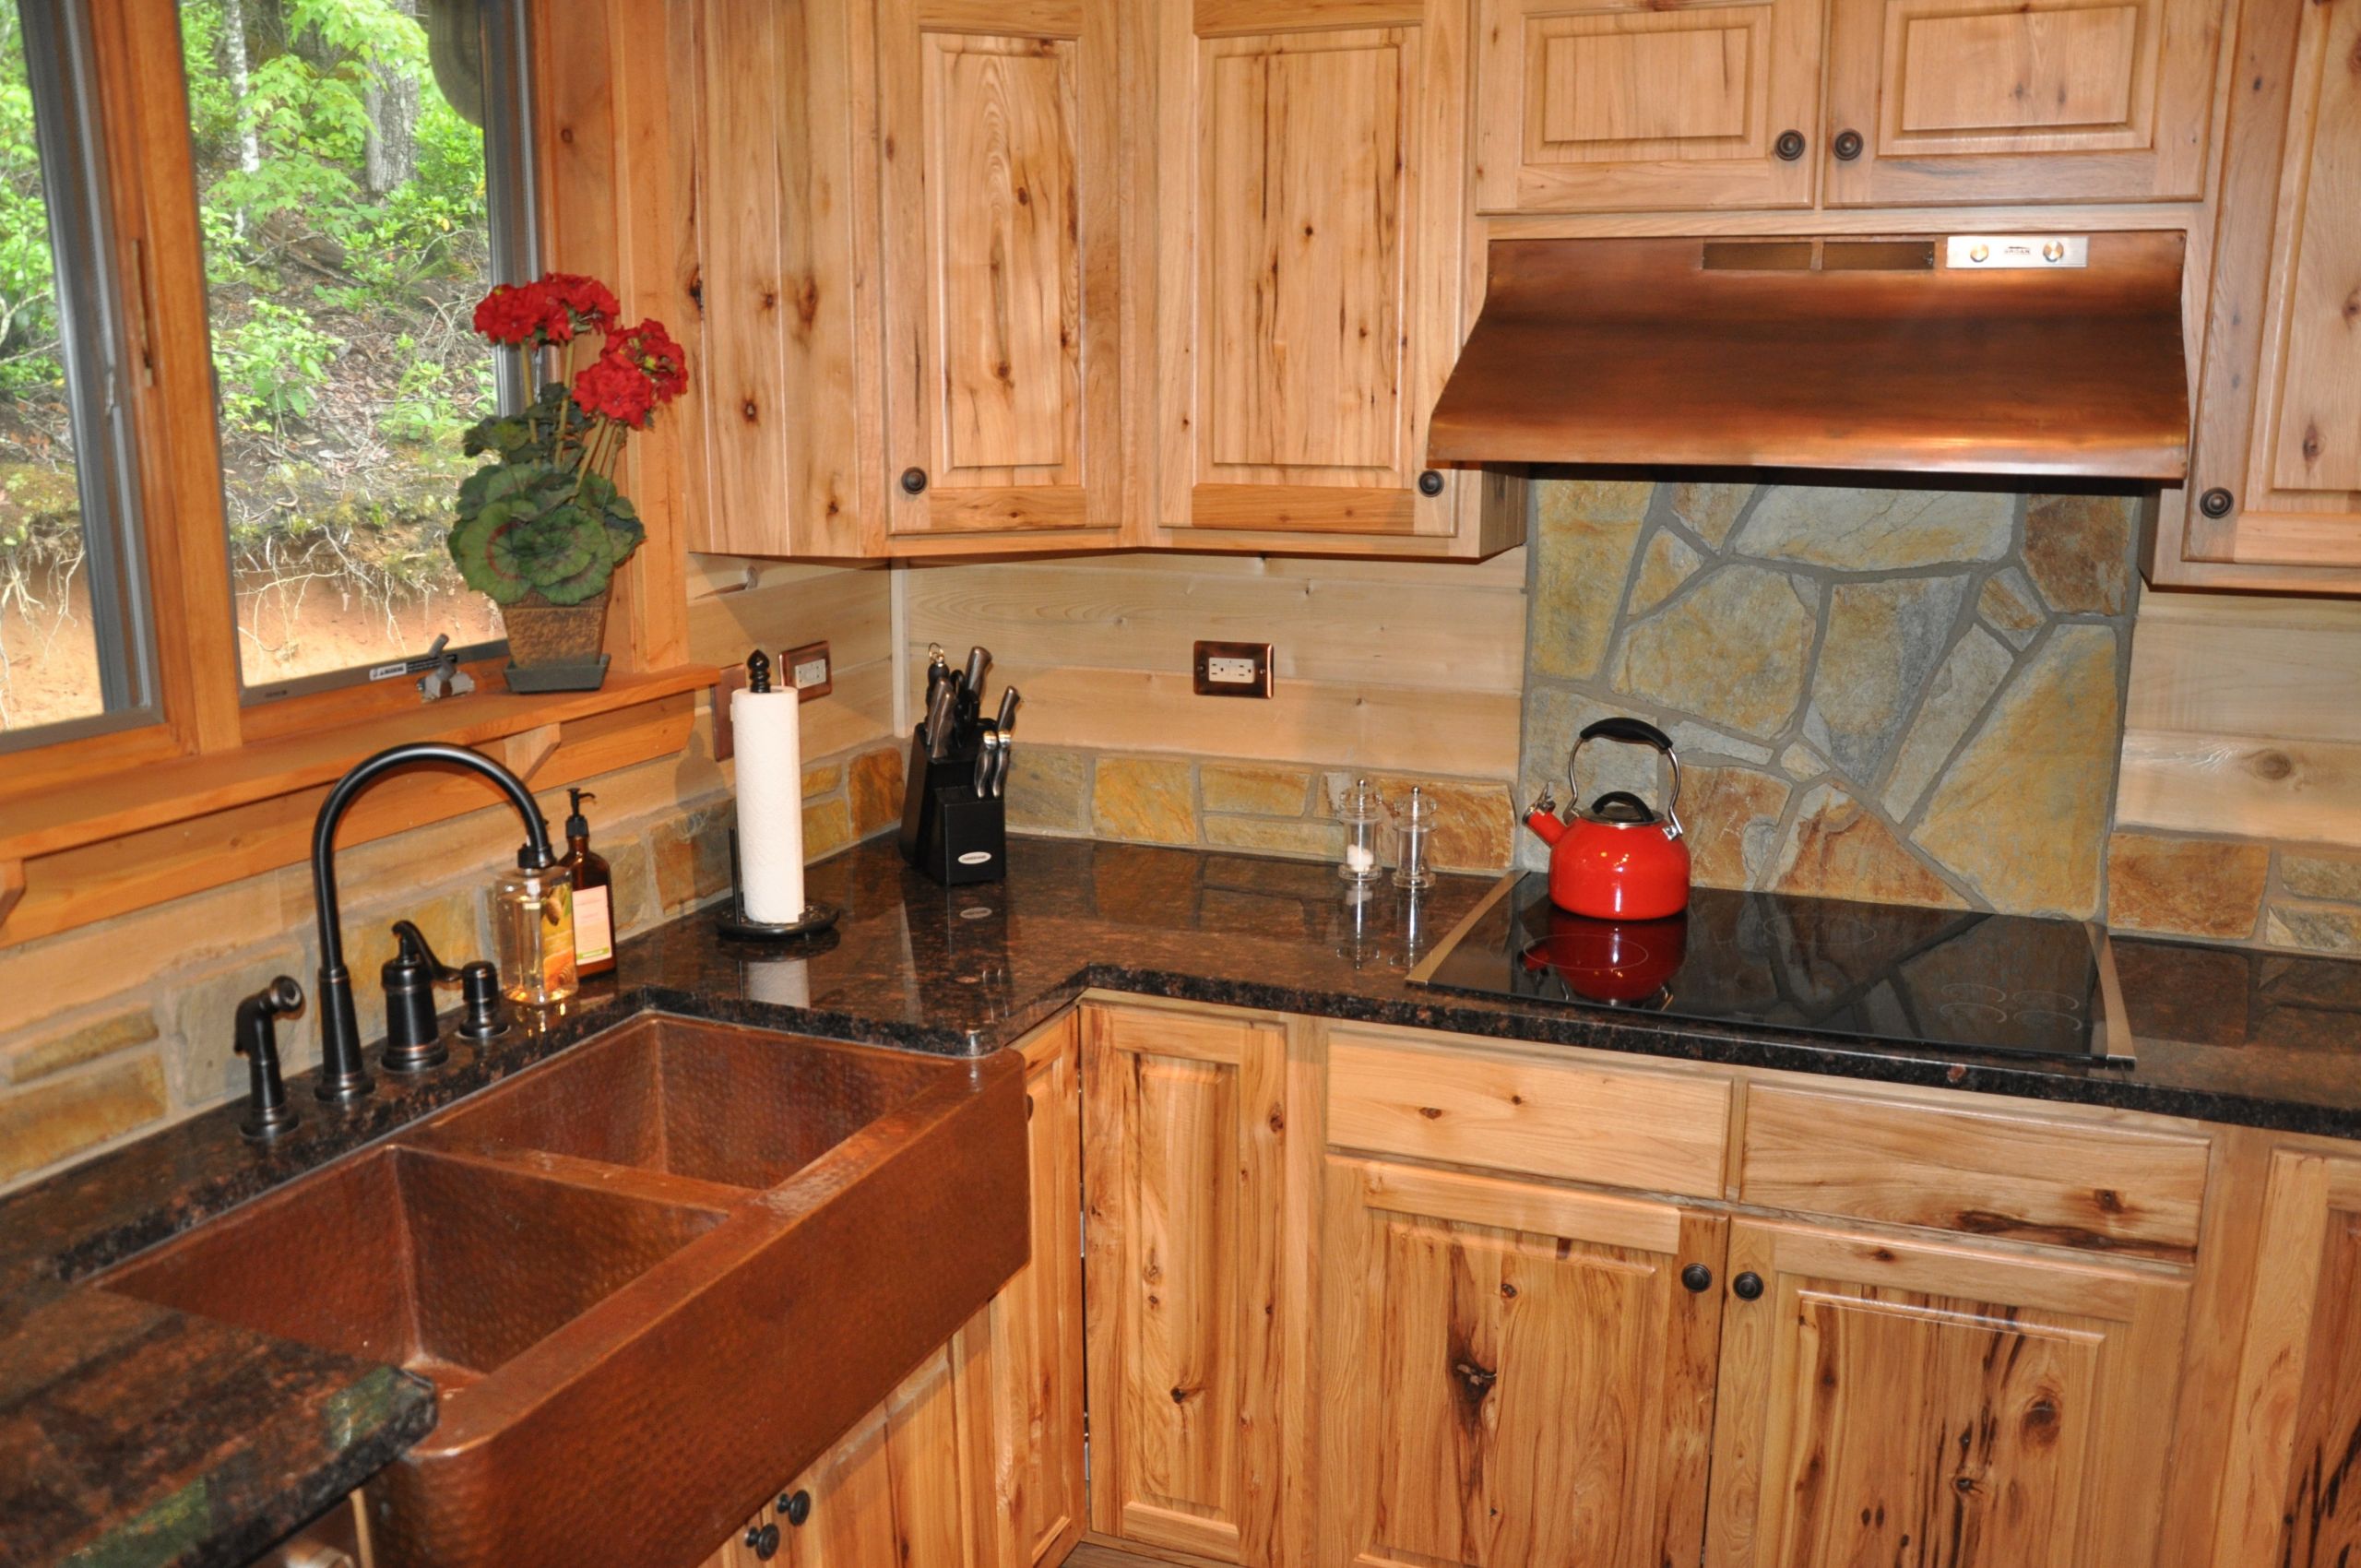 Lowes Unfinished Kitchen Cabinets
 Furniture Choose Your Unfinished Wood Cabinets For